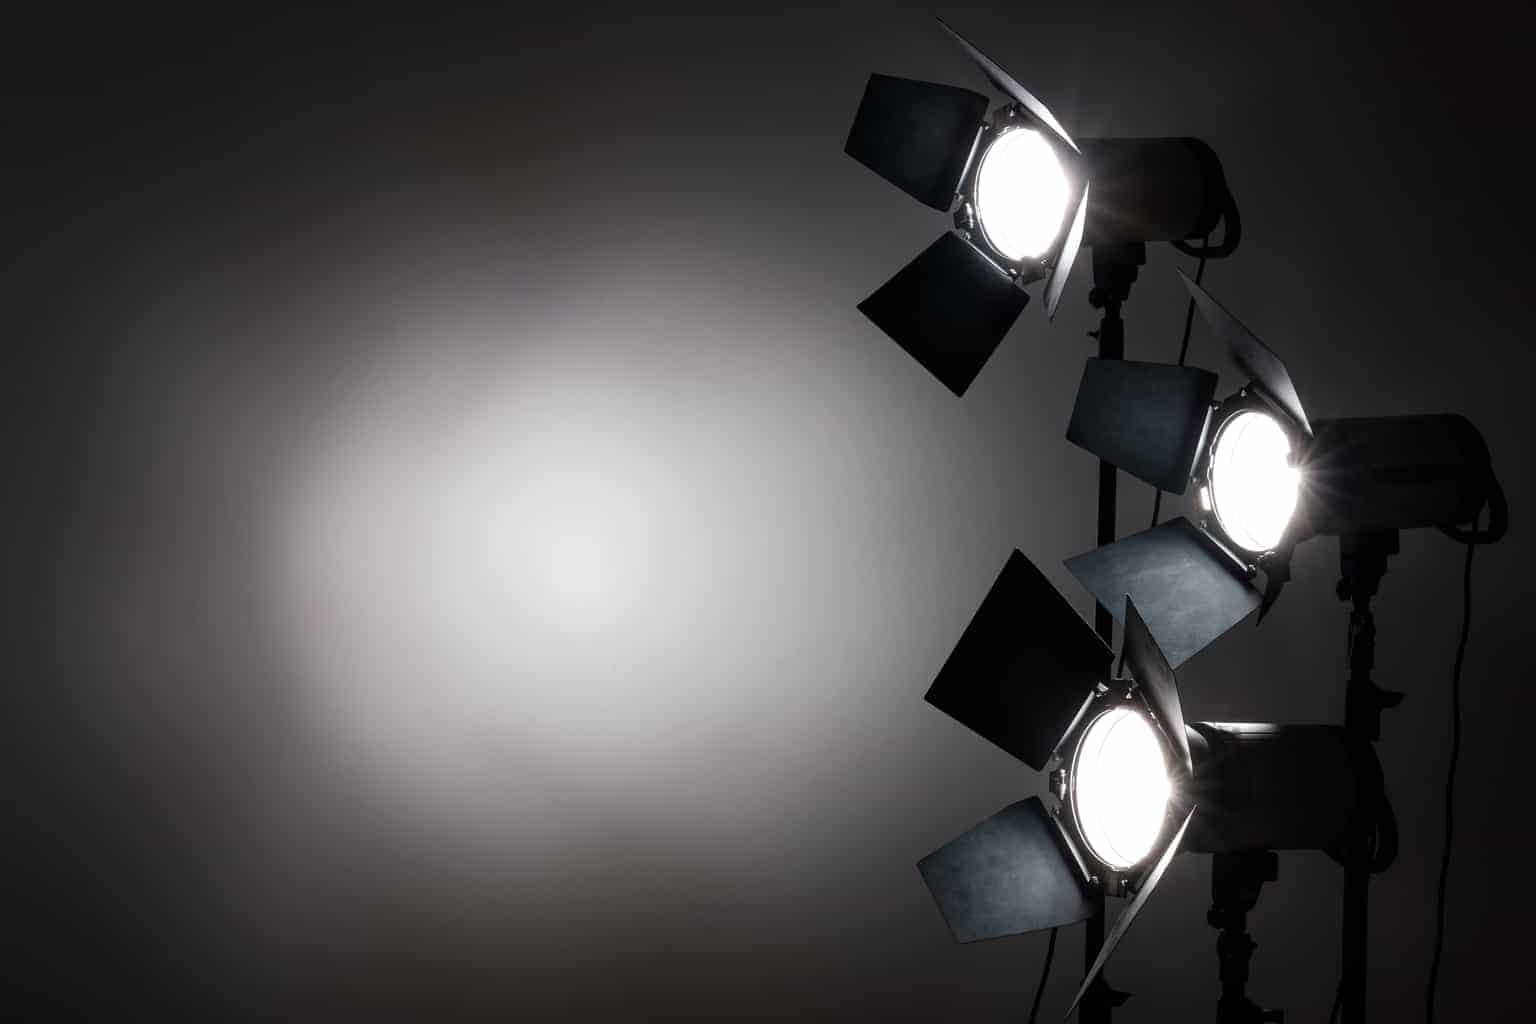 Several reflectors on the black background in photo studio.